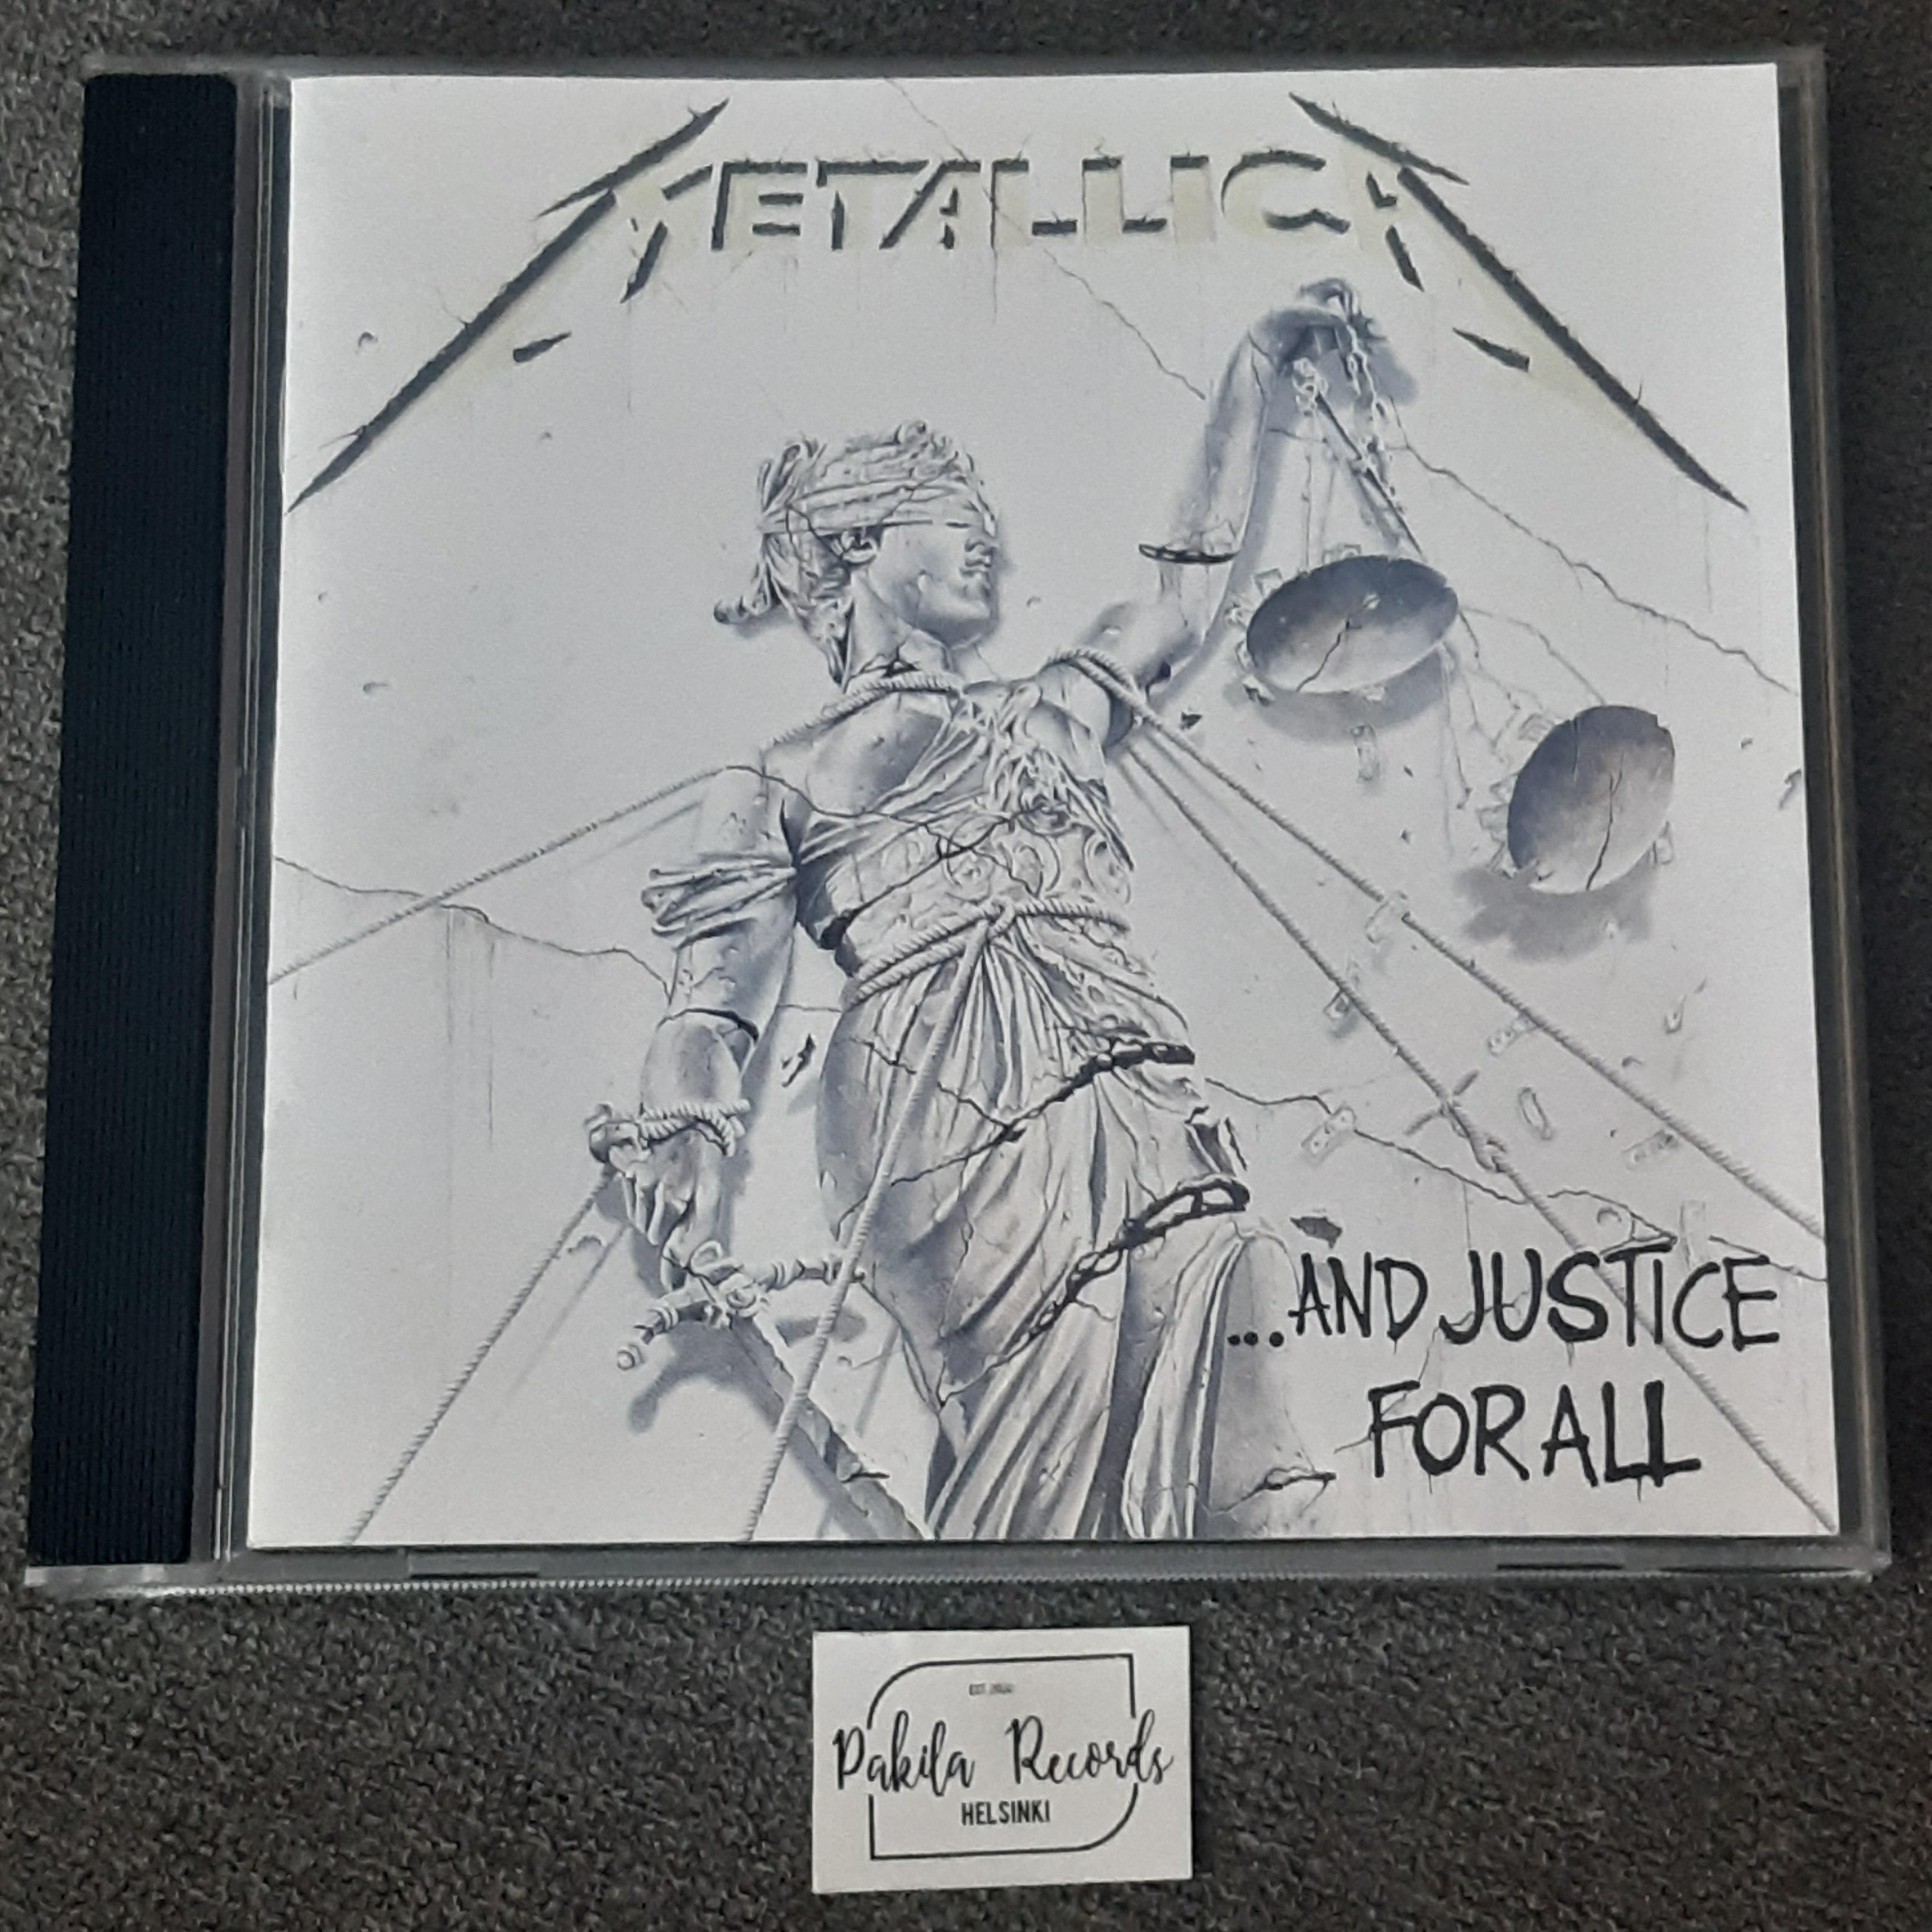 Metallica - ...And Justice For All - CD (käytetty)